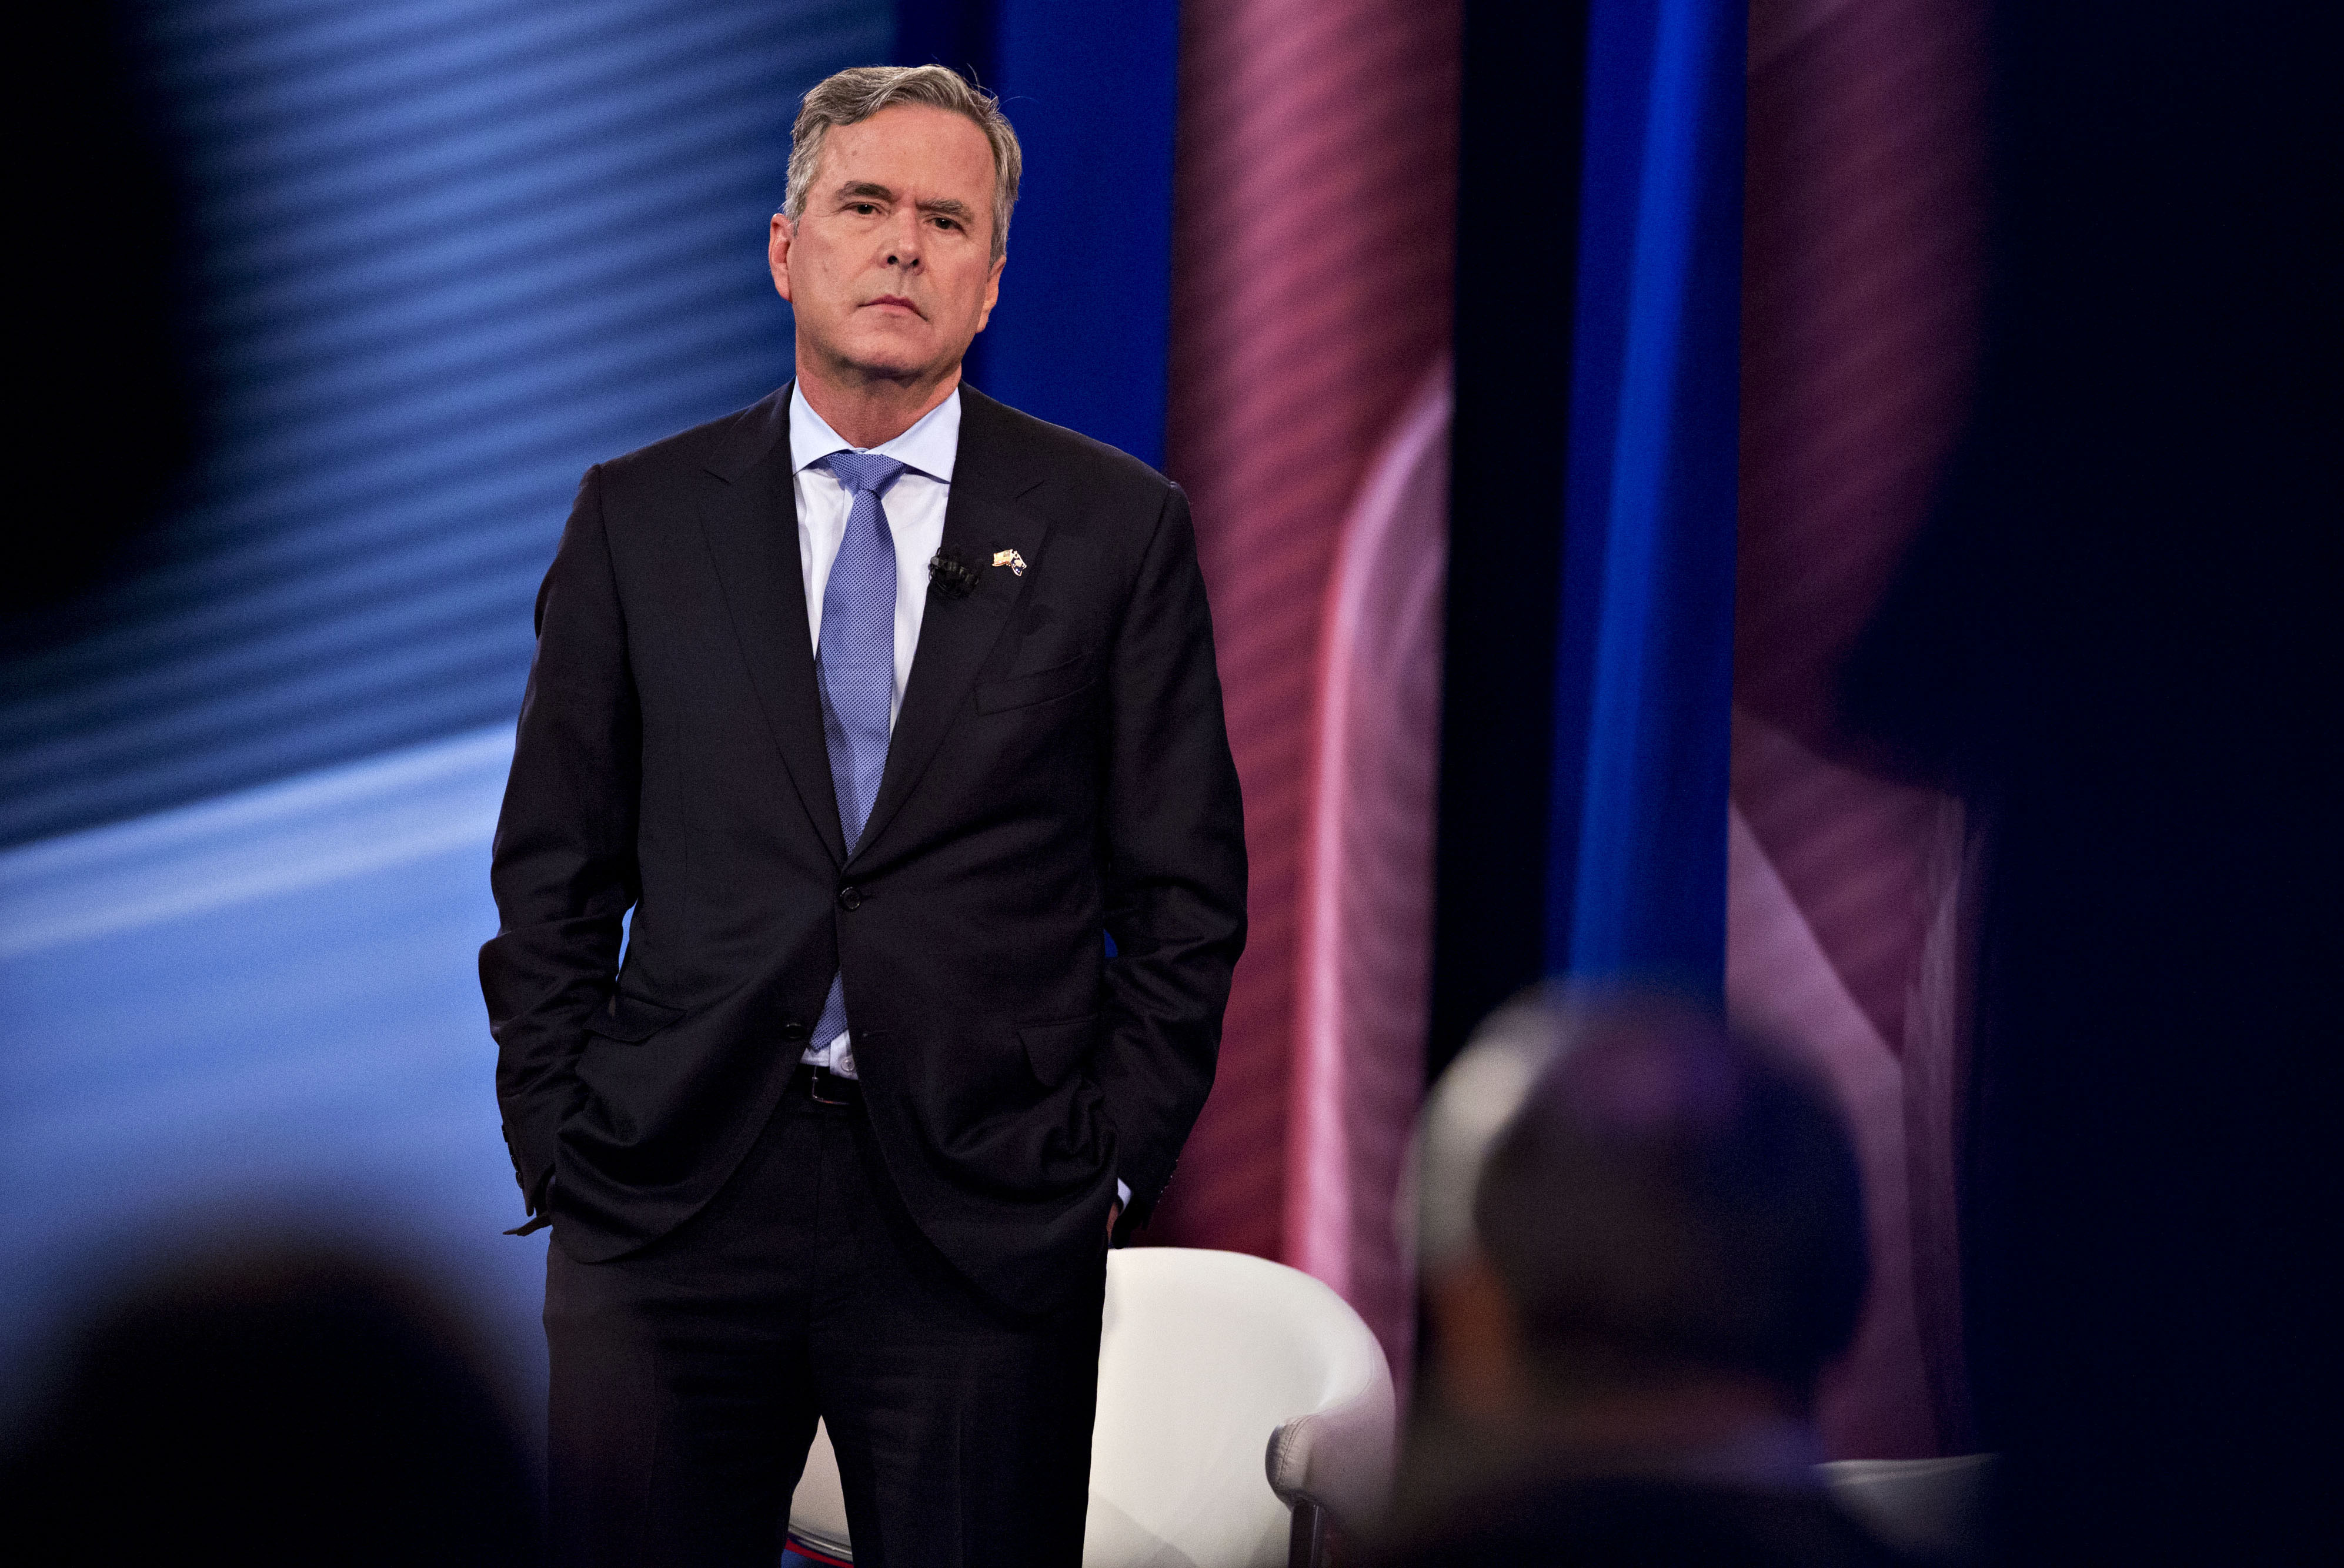 Jeb Bush during a town-hall event in Columbia, S.C., on Feb. 18, 2016 (Daniel Acker—Bloomberg/Getty Images)